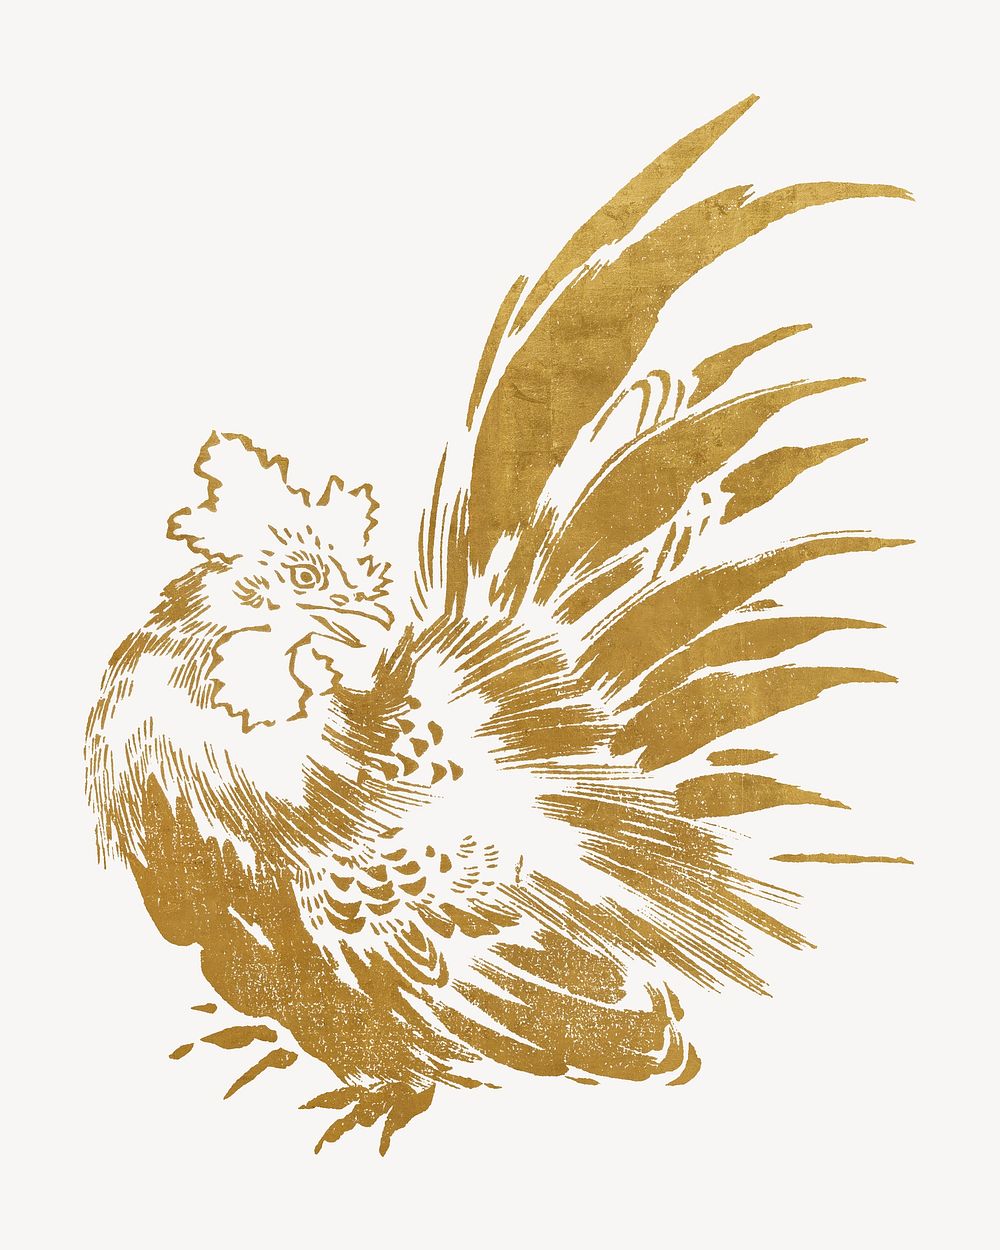 Gold Japanese chicken, animal illustration by Toyeki psd. Remixed by rawpixel.